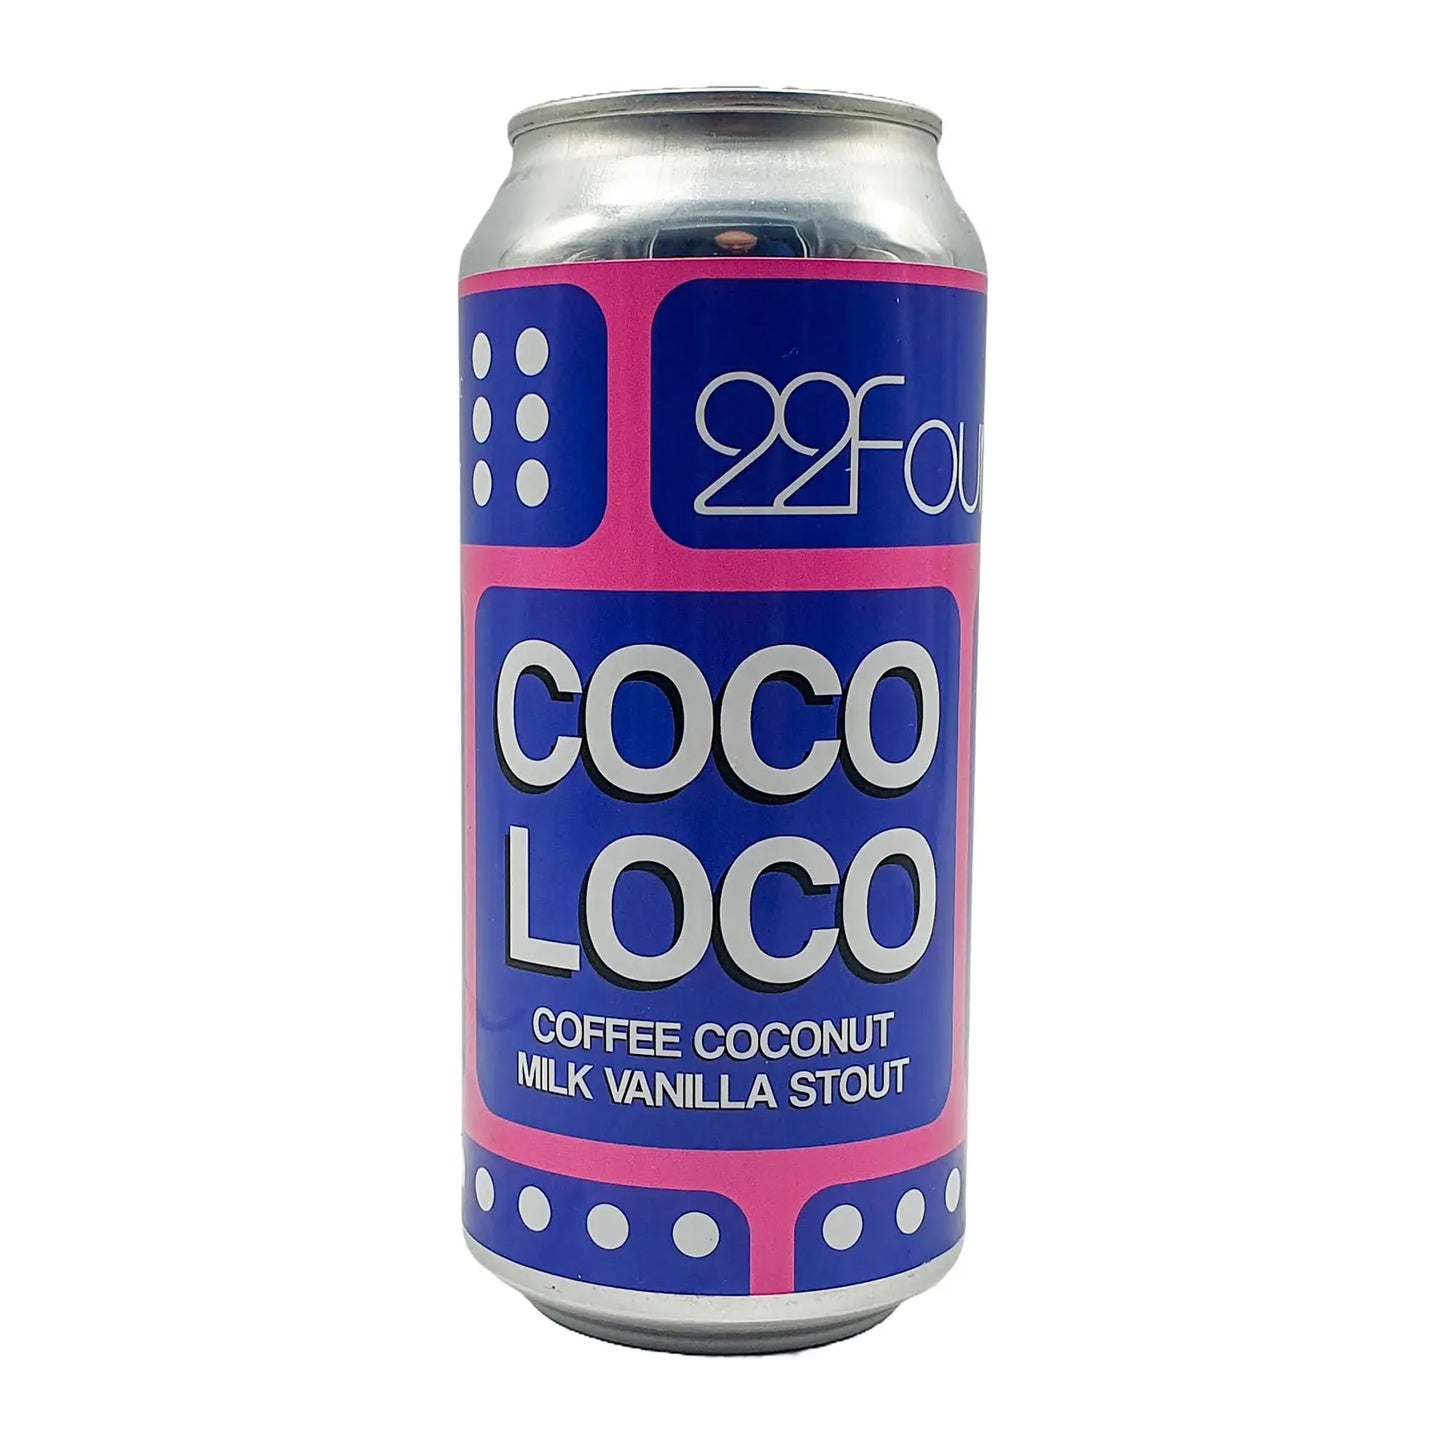 Brewery 22Four - Coco Loco